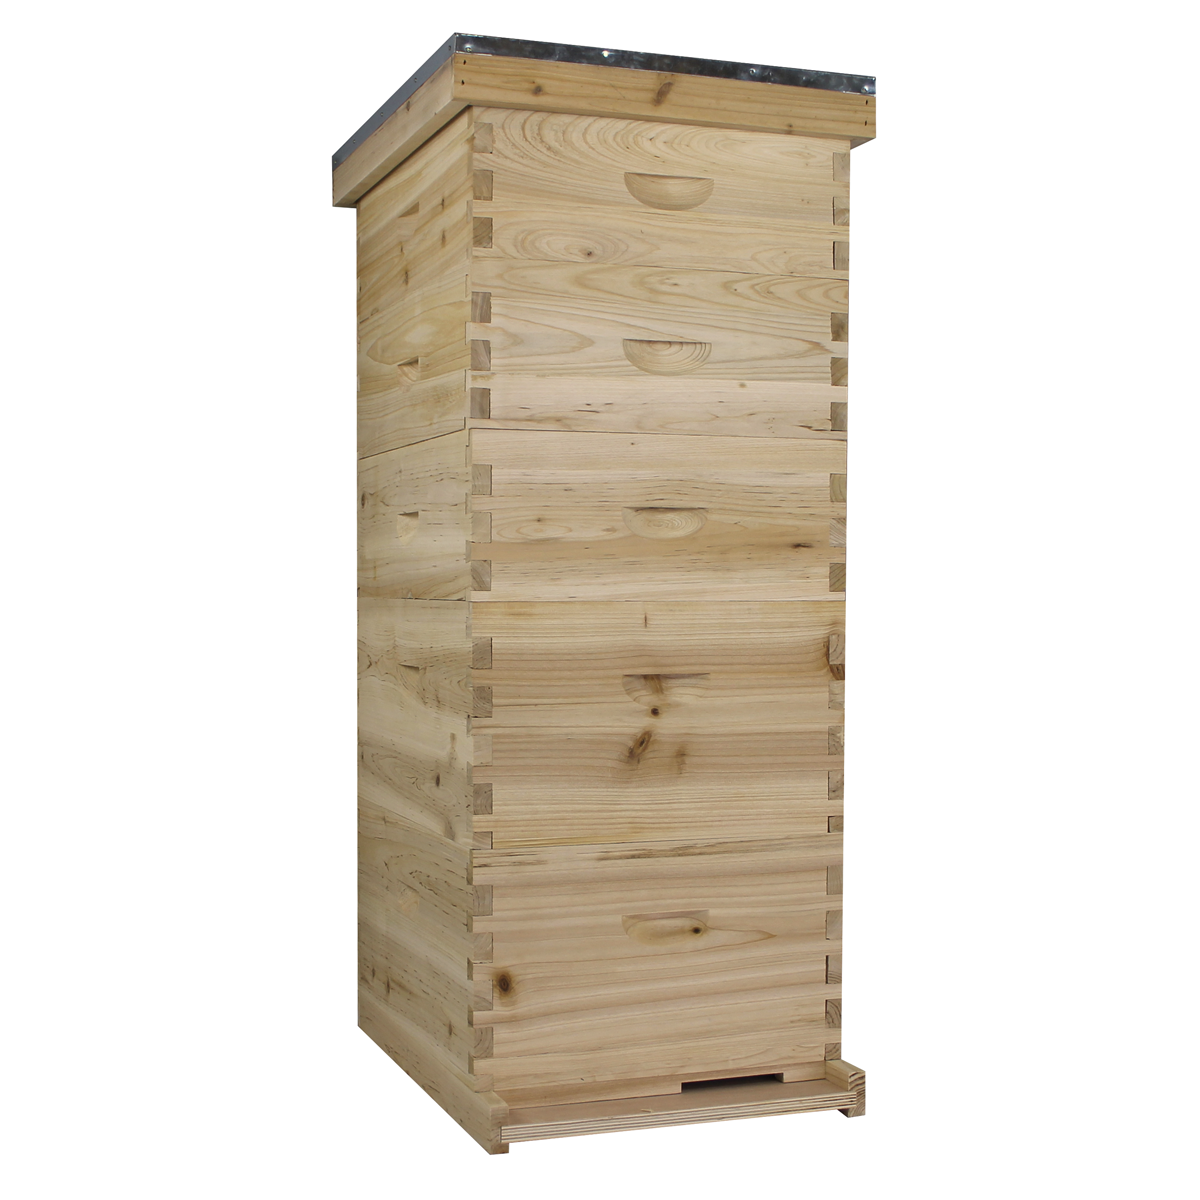 NuBee 10 Frame Beehive With 2 Deep Bee Boxes & 3 Medium Bee Boxes